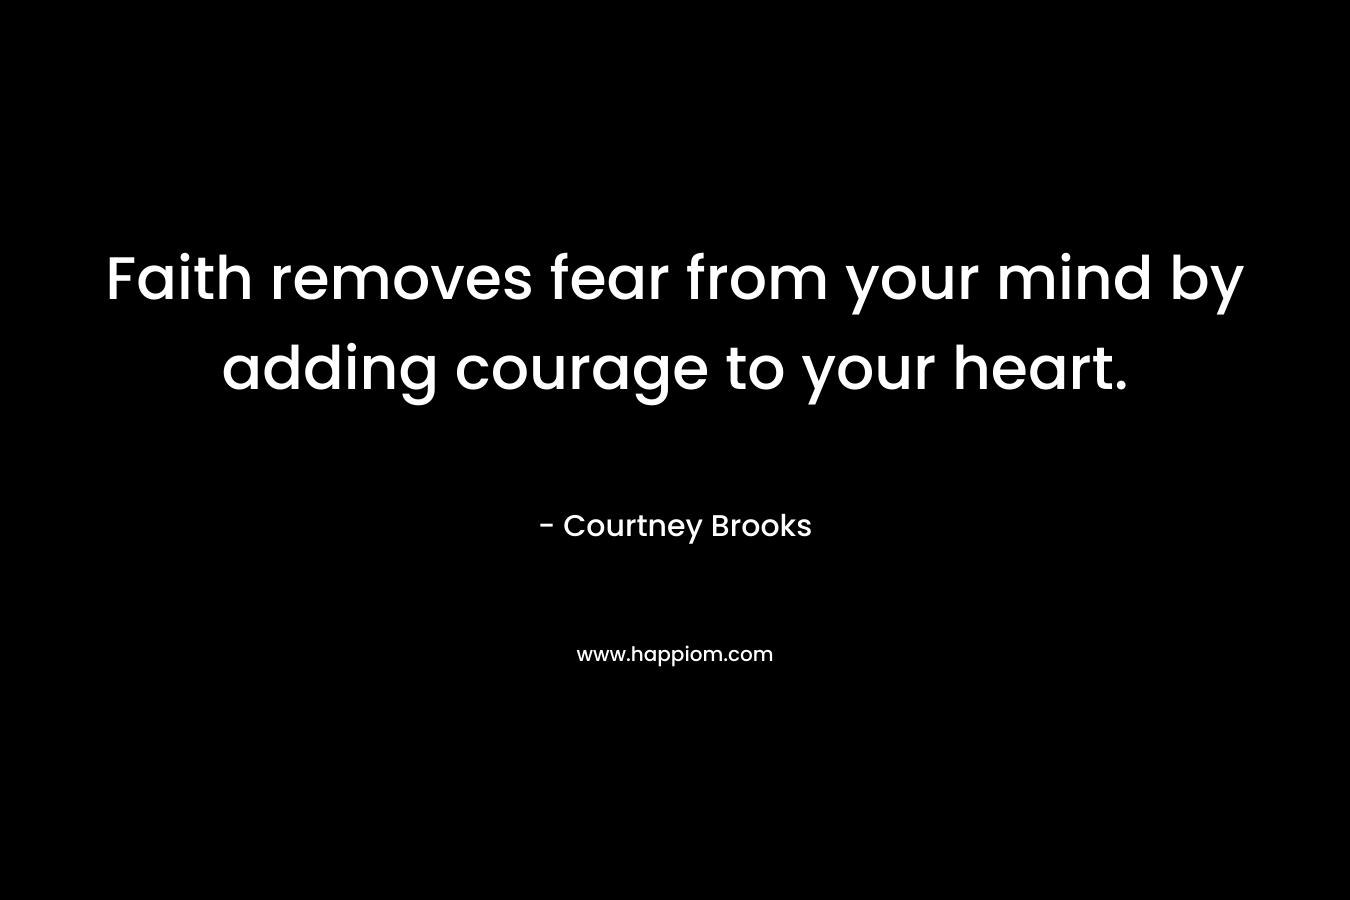 Faith removes fear from your mind by adding courage to your heart.